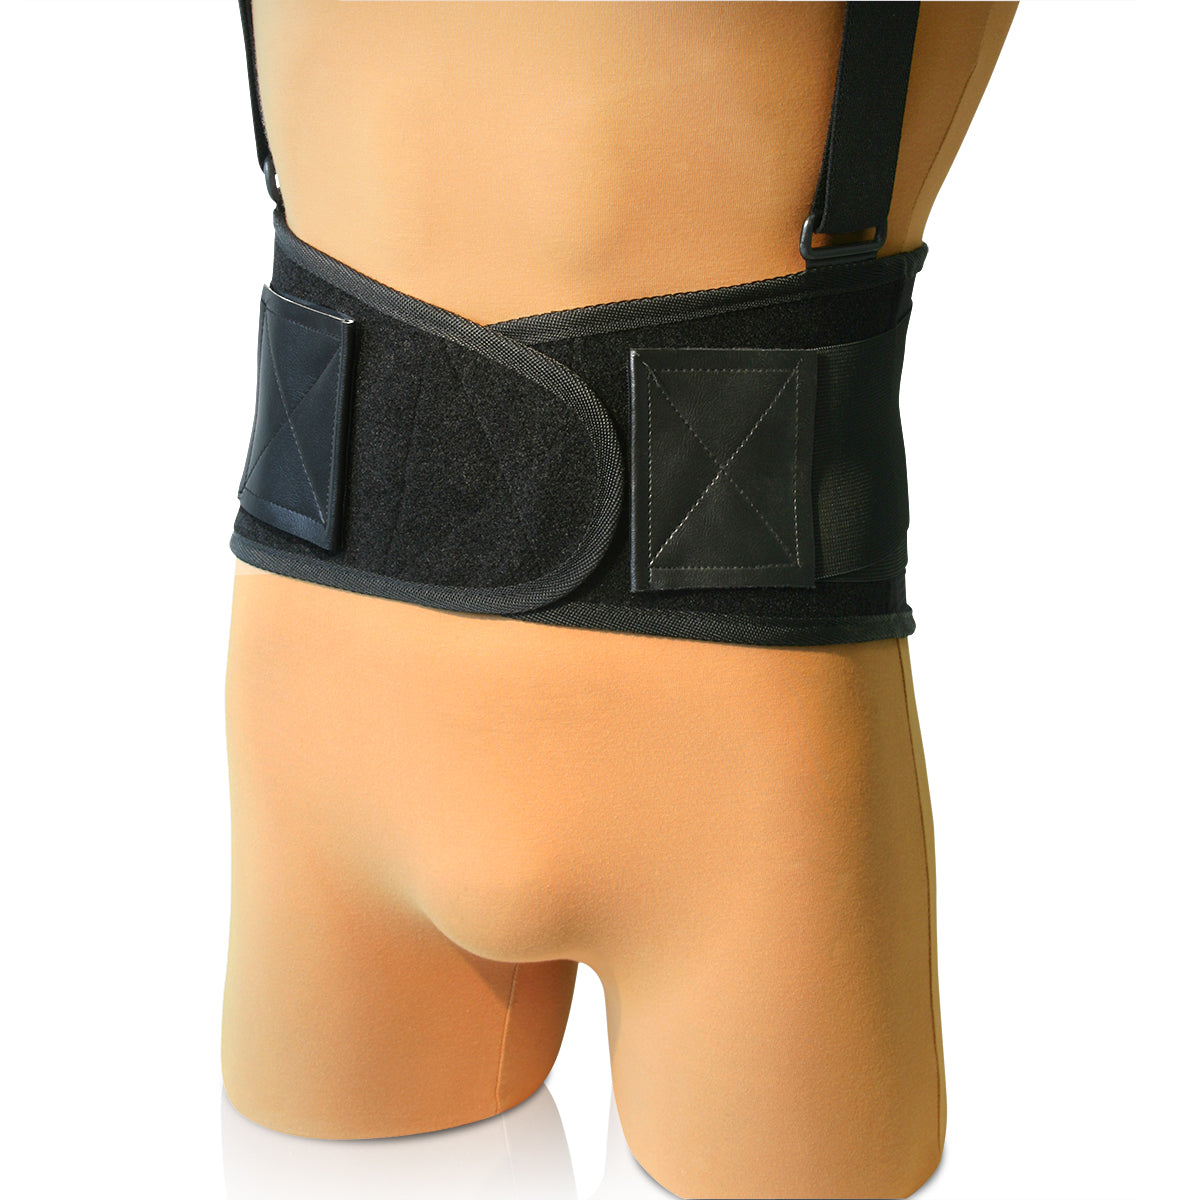 Deluxe Breathable Spandex Back Belt, 5XL